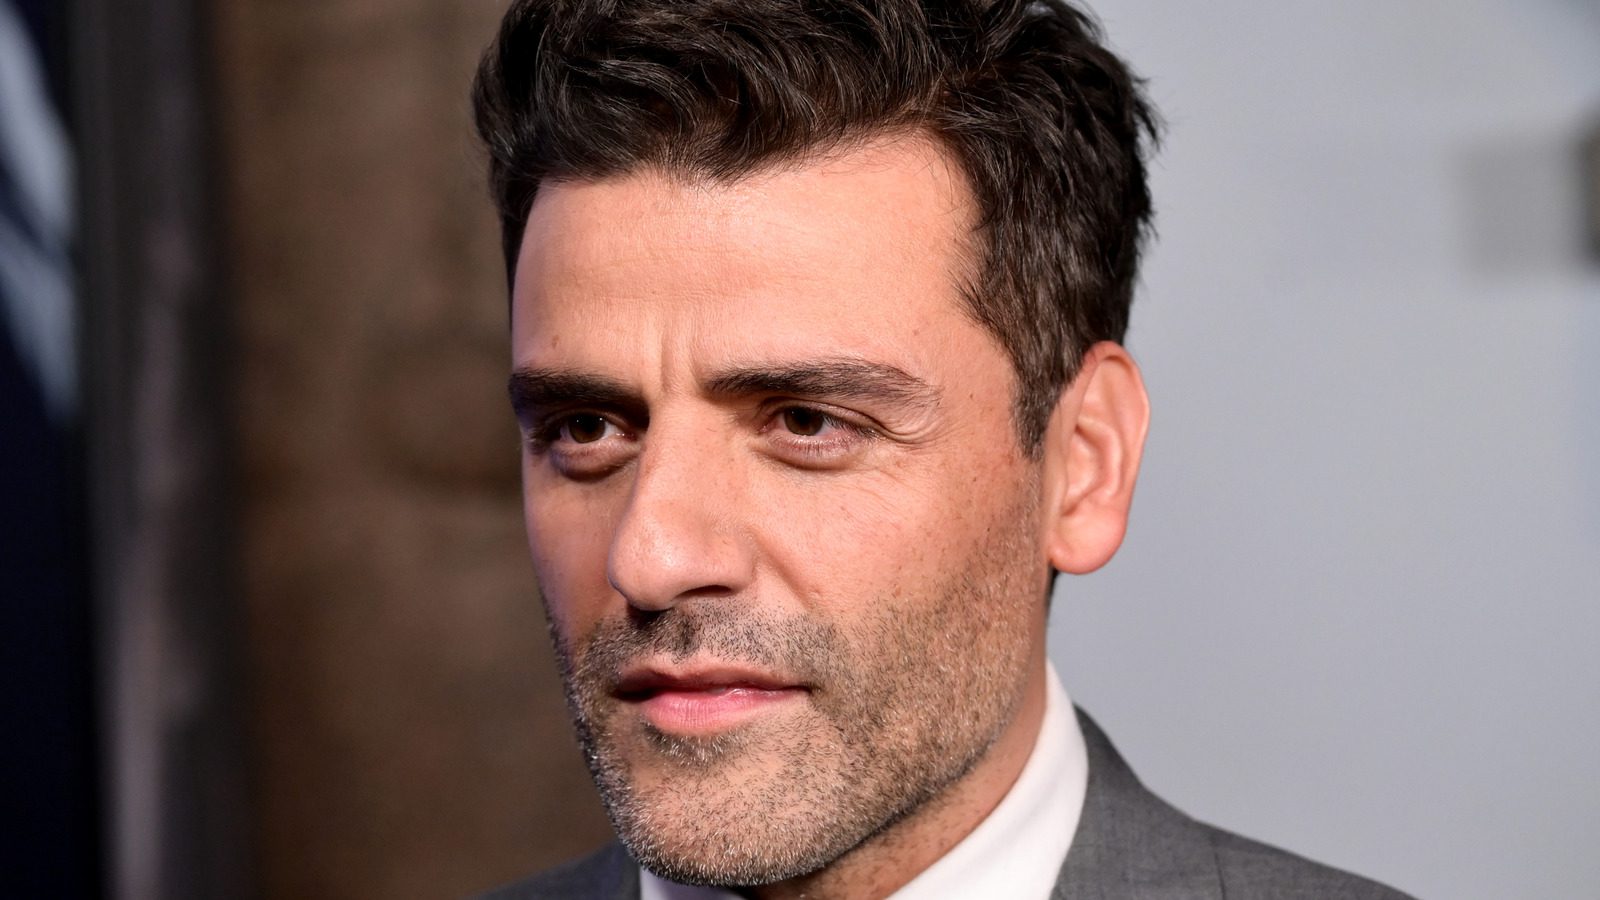 This Look At Oscar Isaac As Wolverine Has Us Completely Speechless